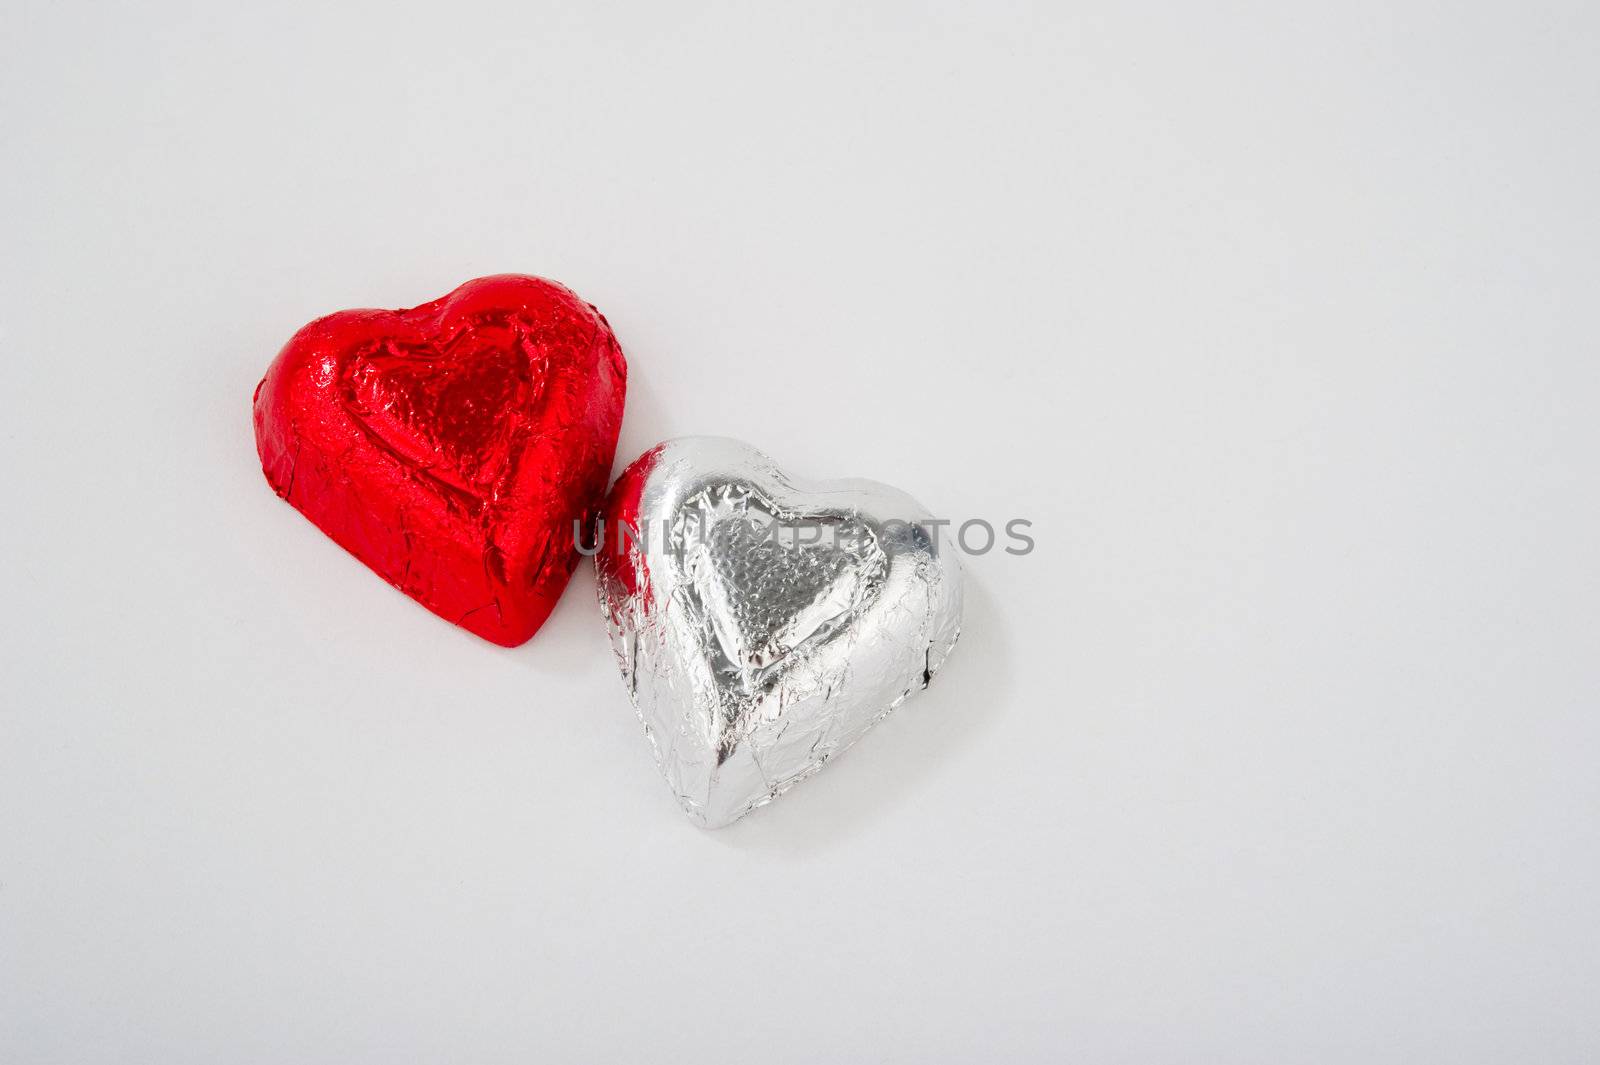 Two Foil Wrapped Heart Shaped Candies by gregory21